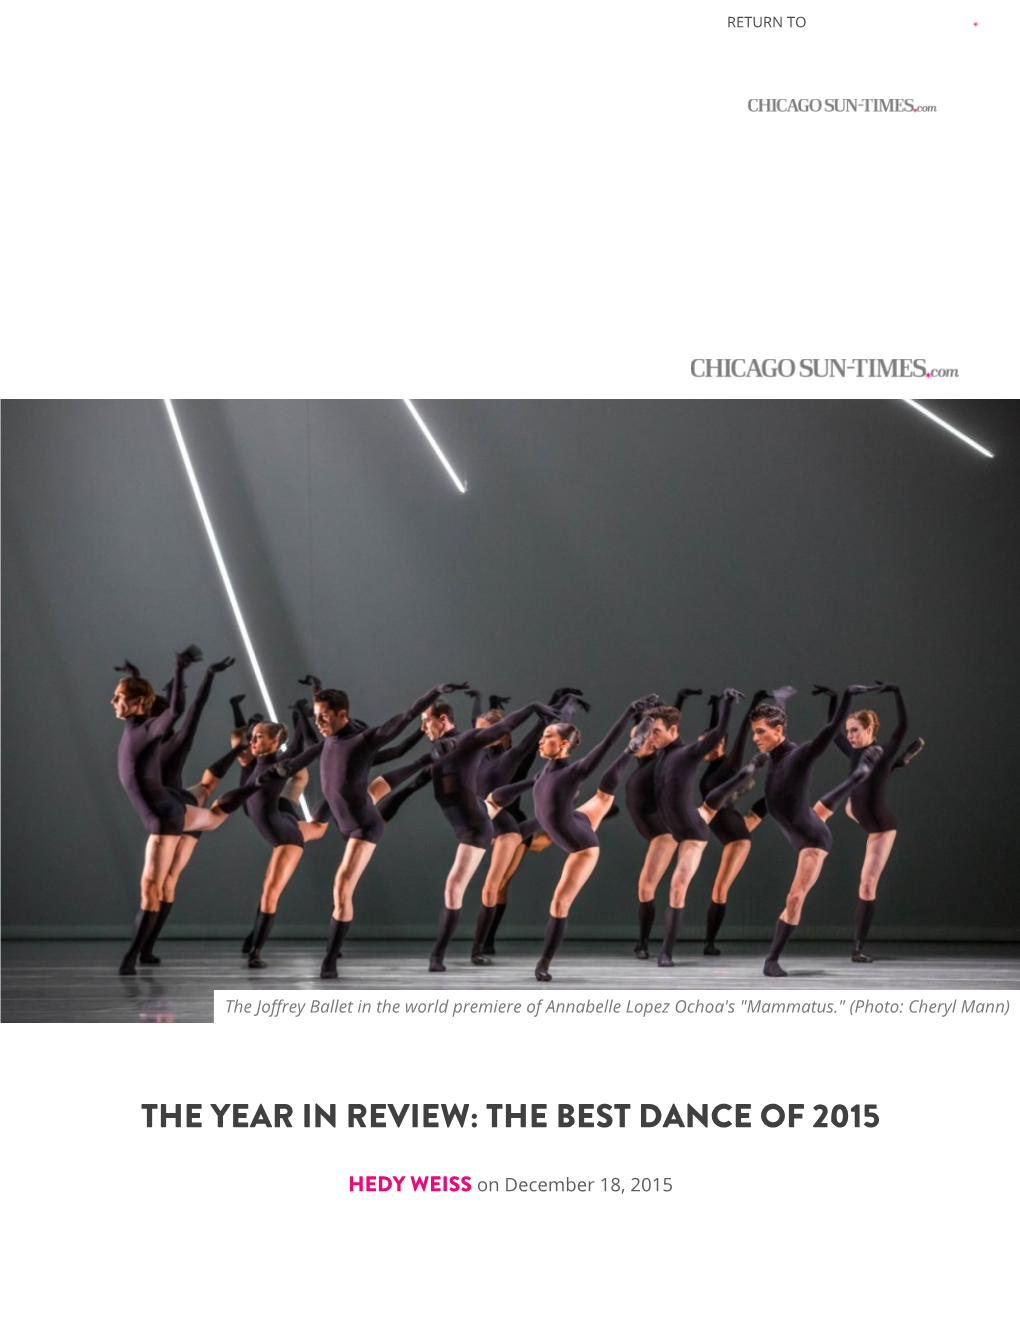 The Year in Review: the Best Dance of 2015